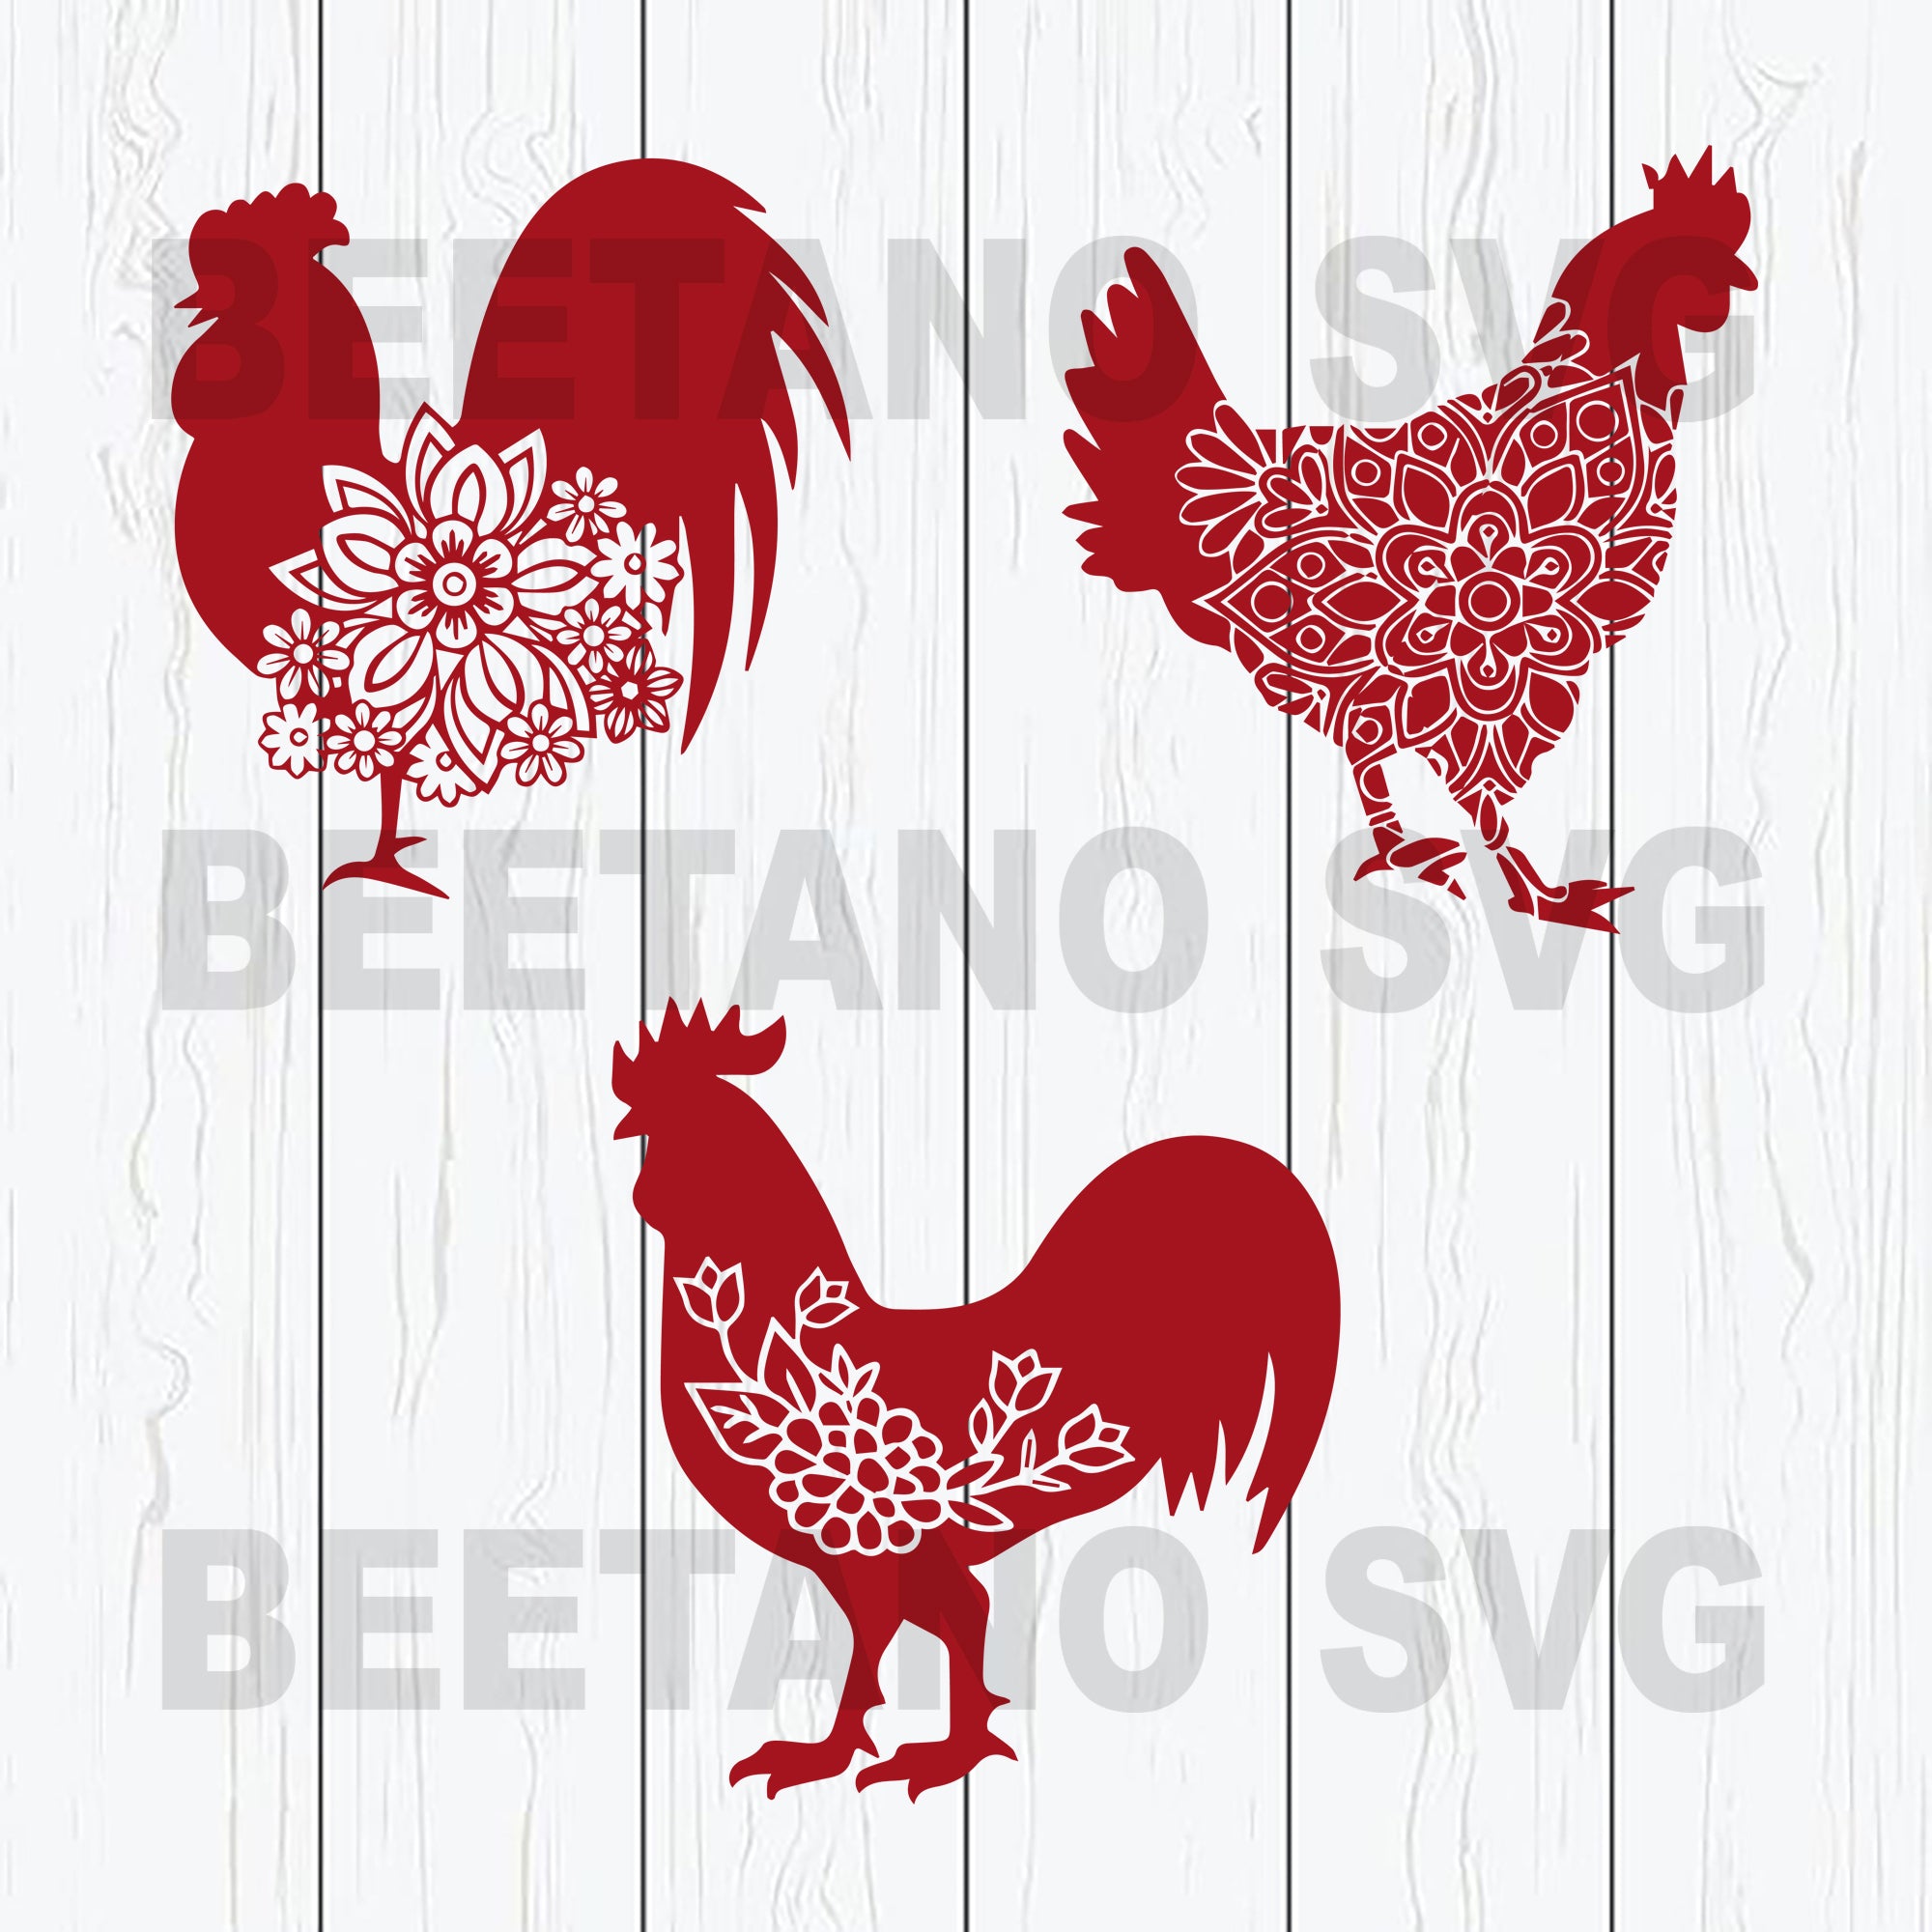 Download Red Mandala Chicken Svg Files Mandala Chicken Files For Instant Downl Beetanosvg Scalable Vector Graphics